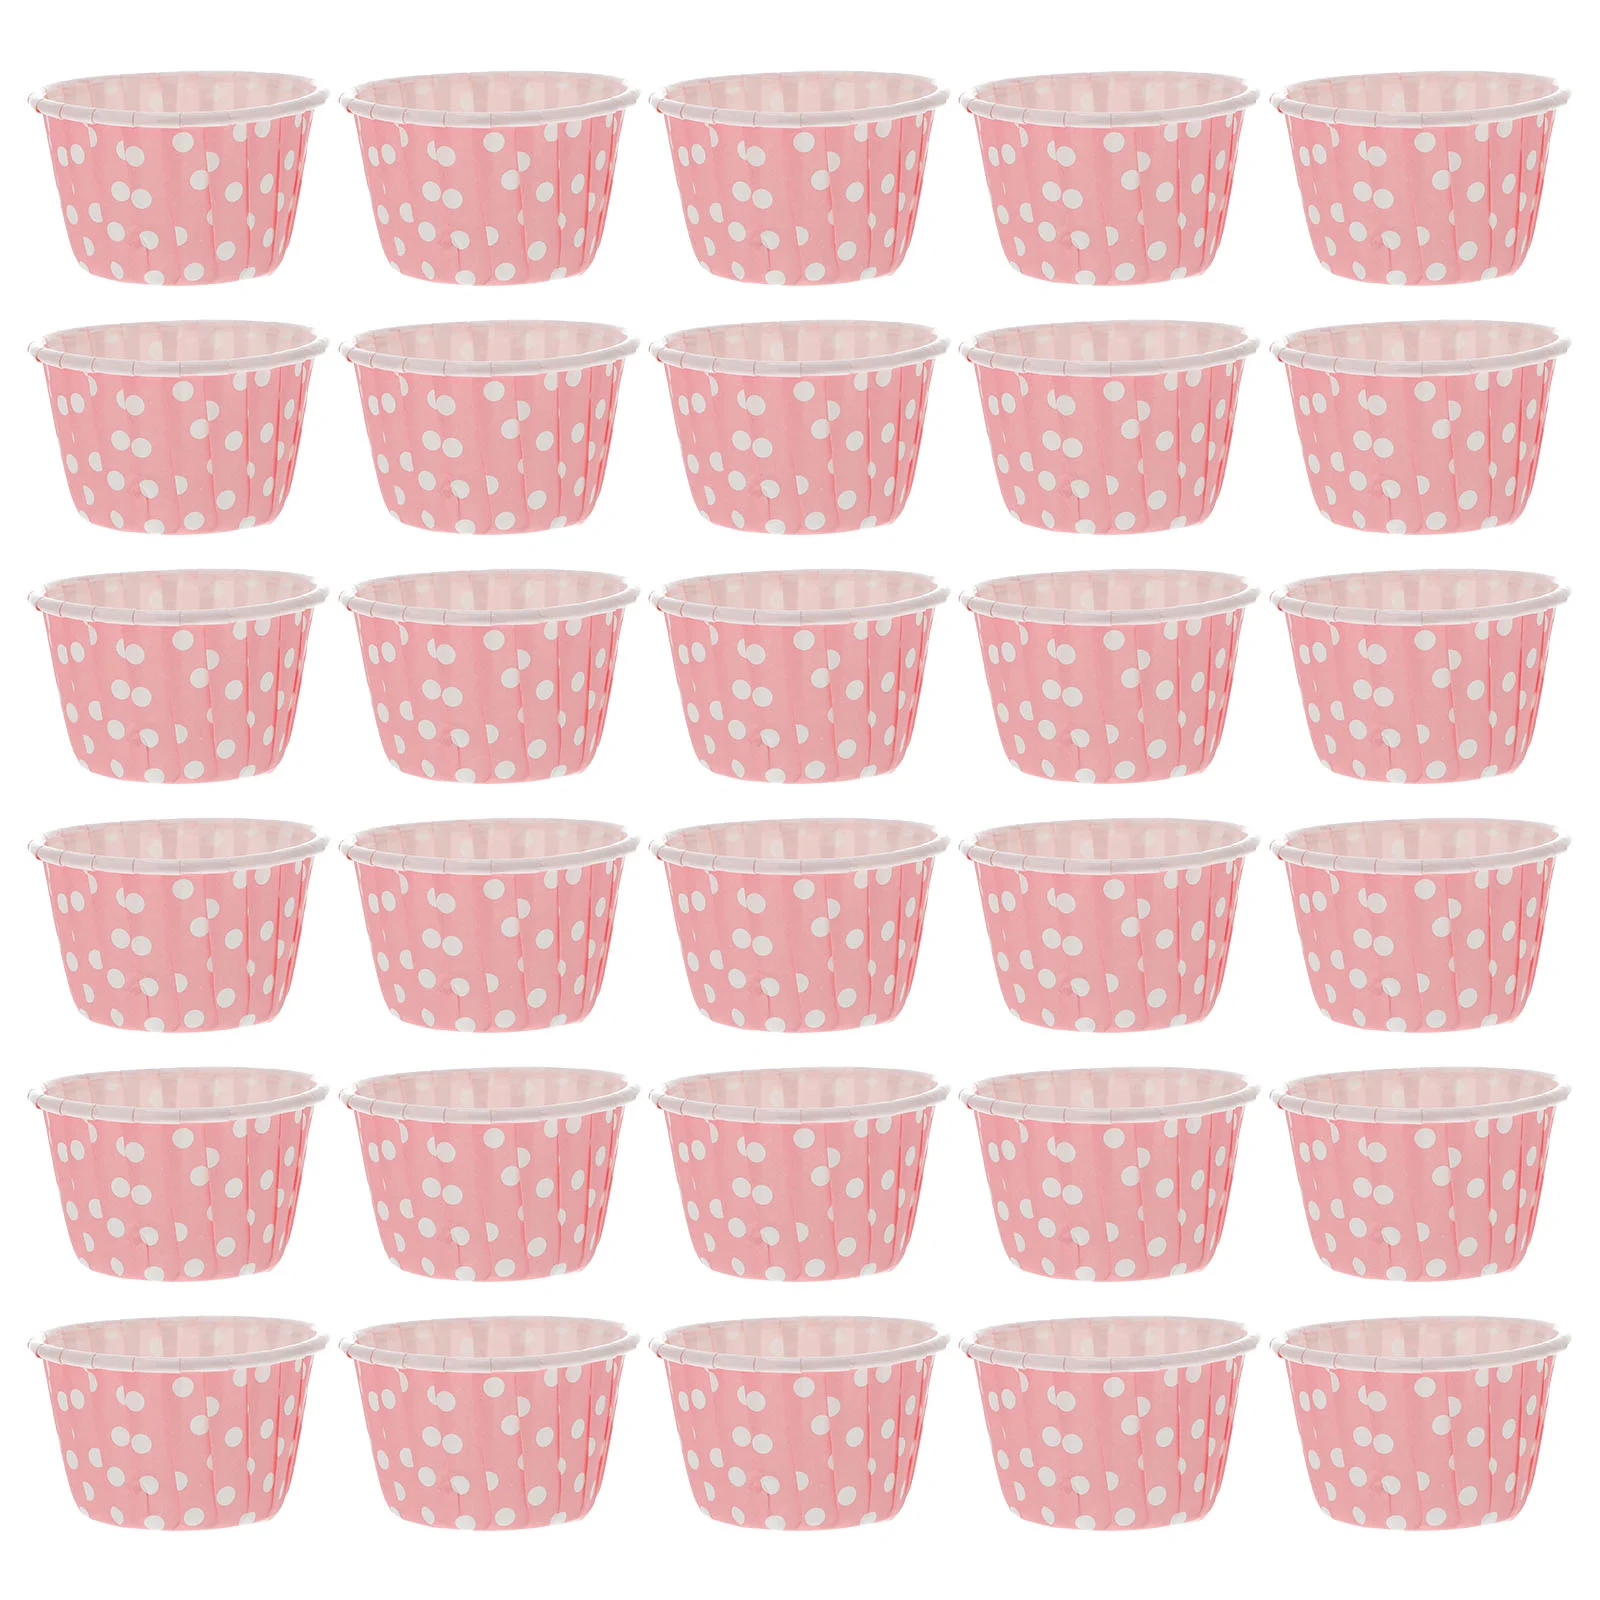 

Cups Paper Cup Ice Cream Bowls Dessert Sundae Disposable Yogurt Bowl Cupcake Container Pudding Jelly Muffin Cases Liners Party